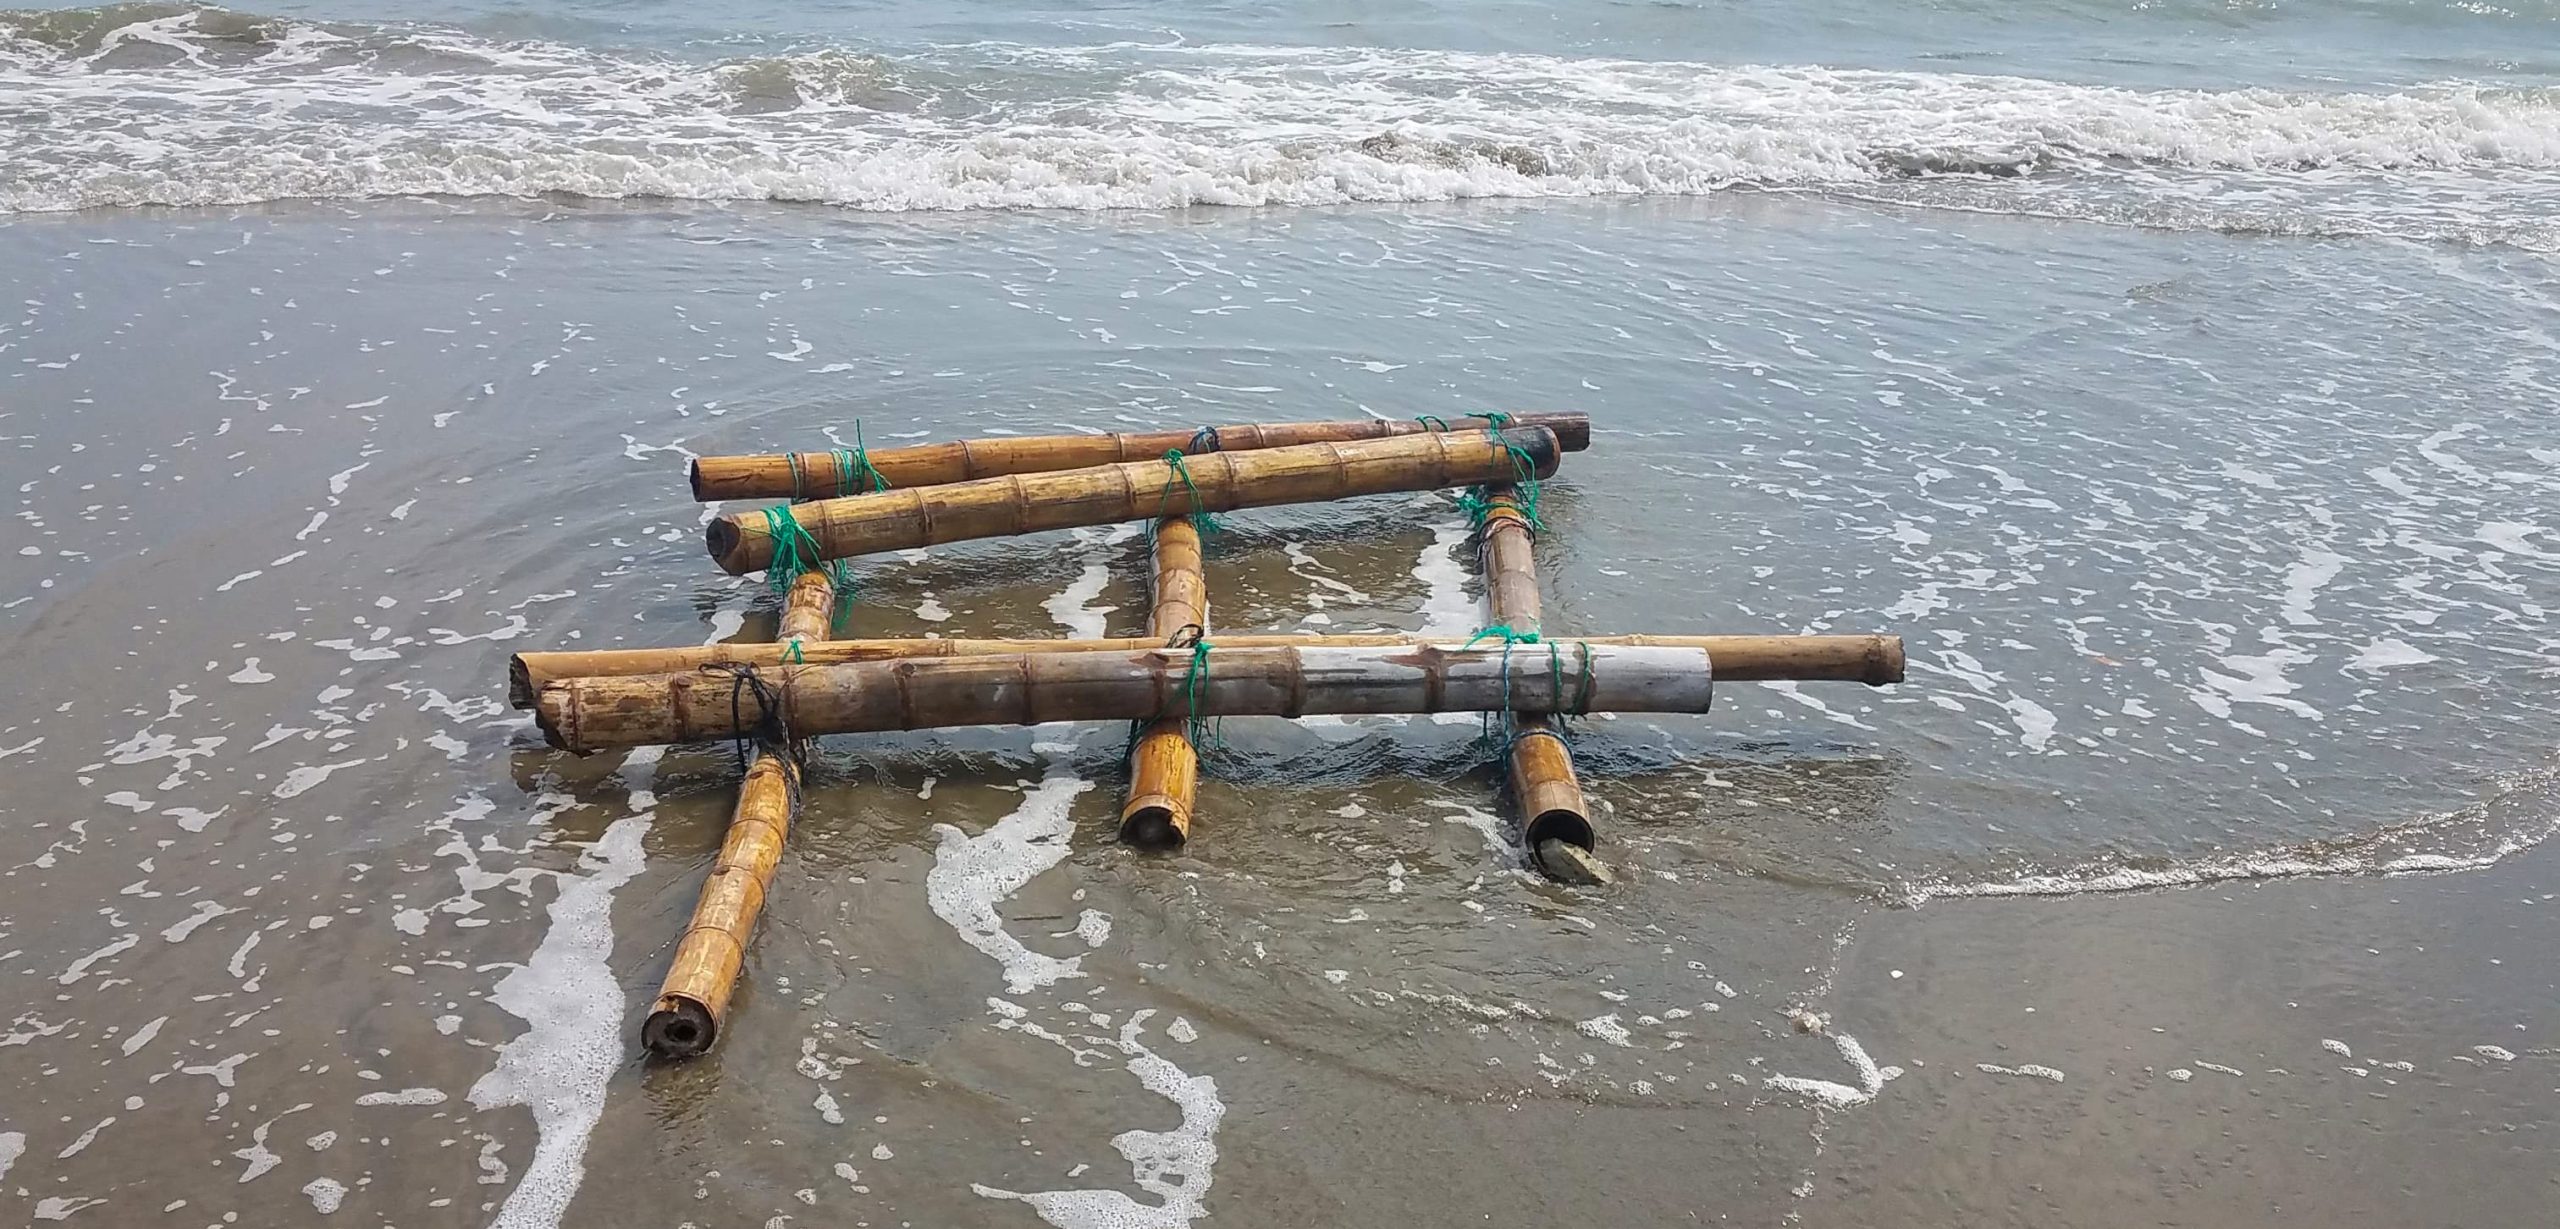 A bamboo fishing rig, approximately 1.5 meters by two meters, washes onto the beach of Posorja, Ecuador. Photo by Juan José Alava